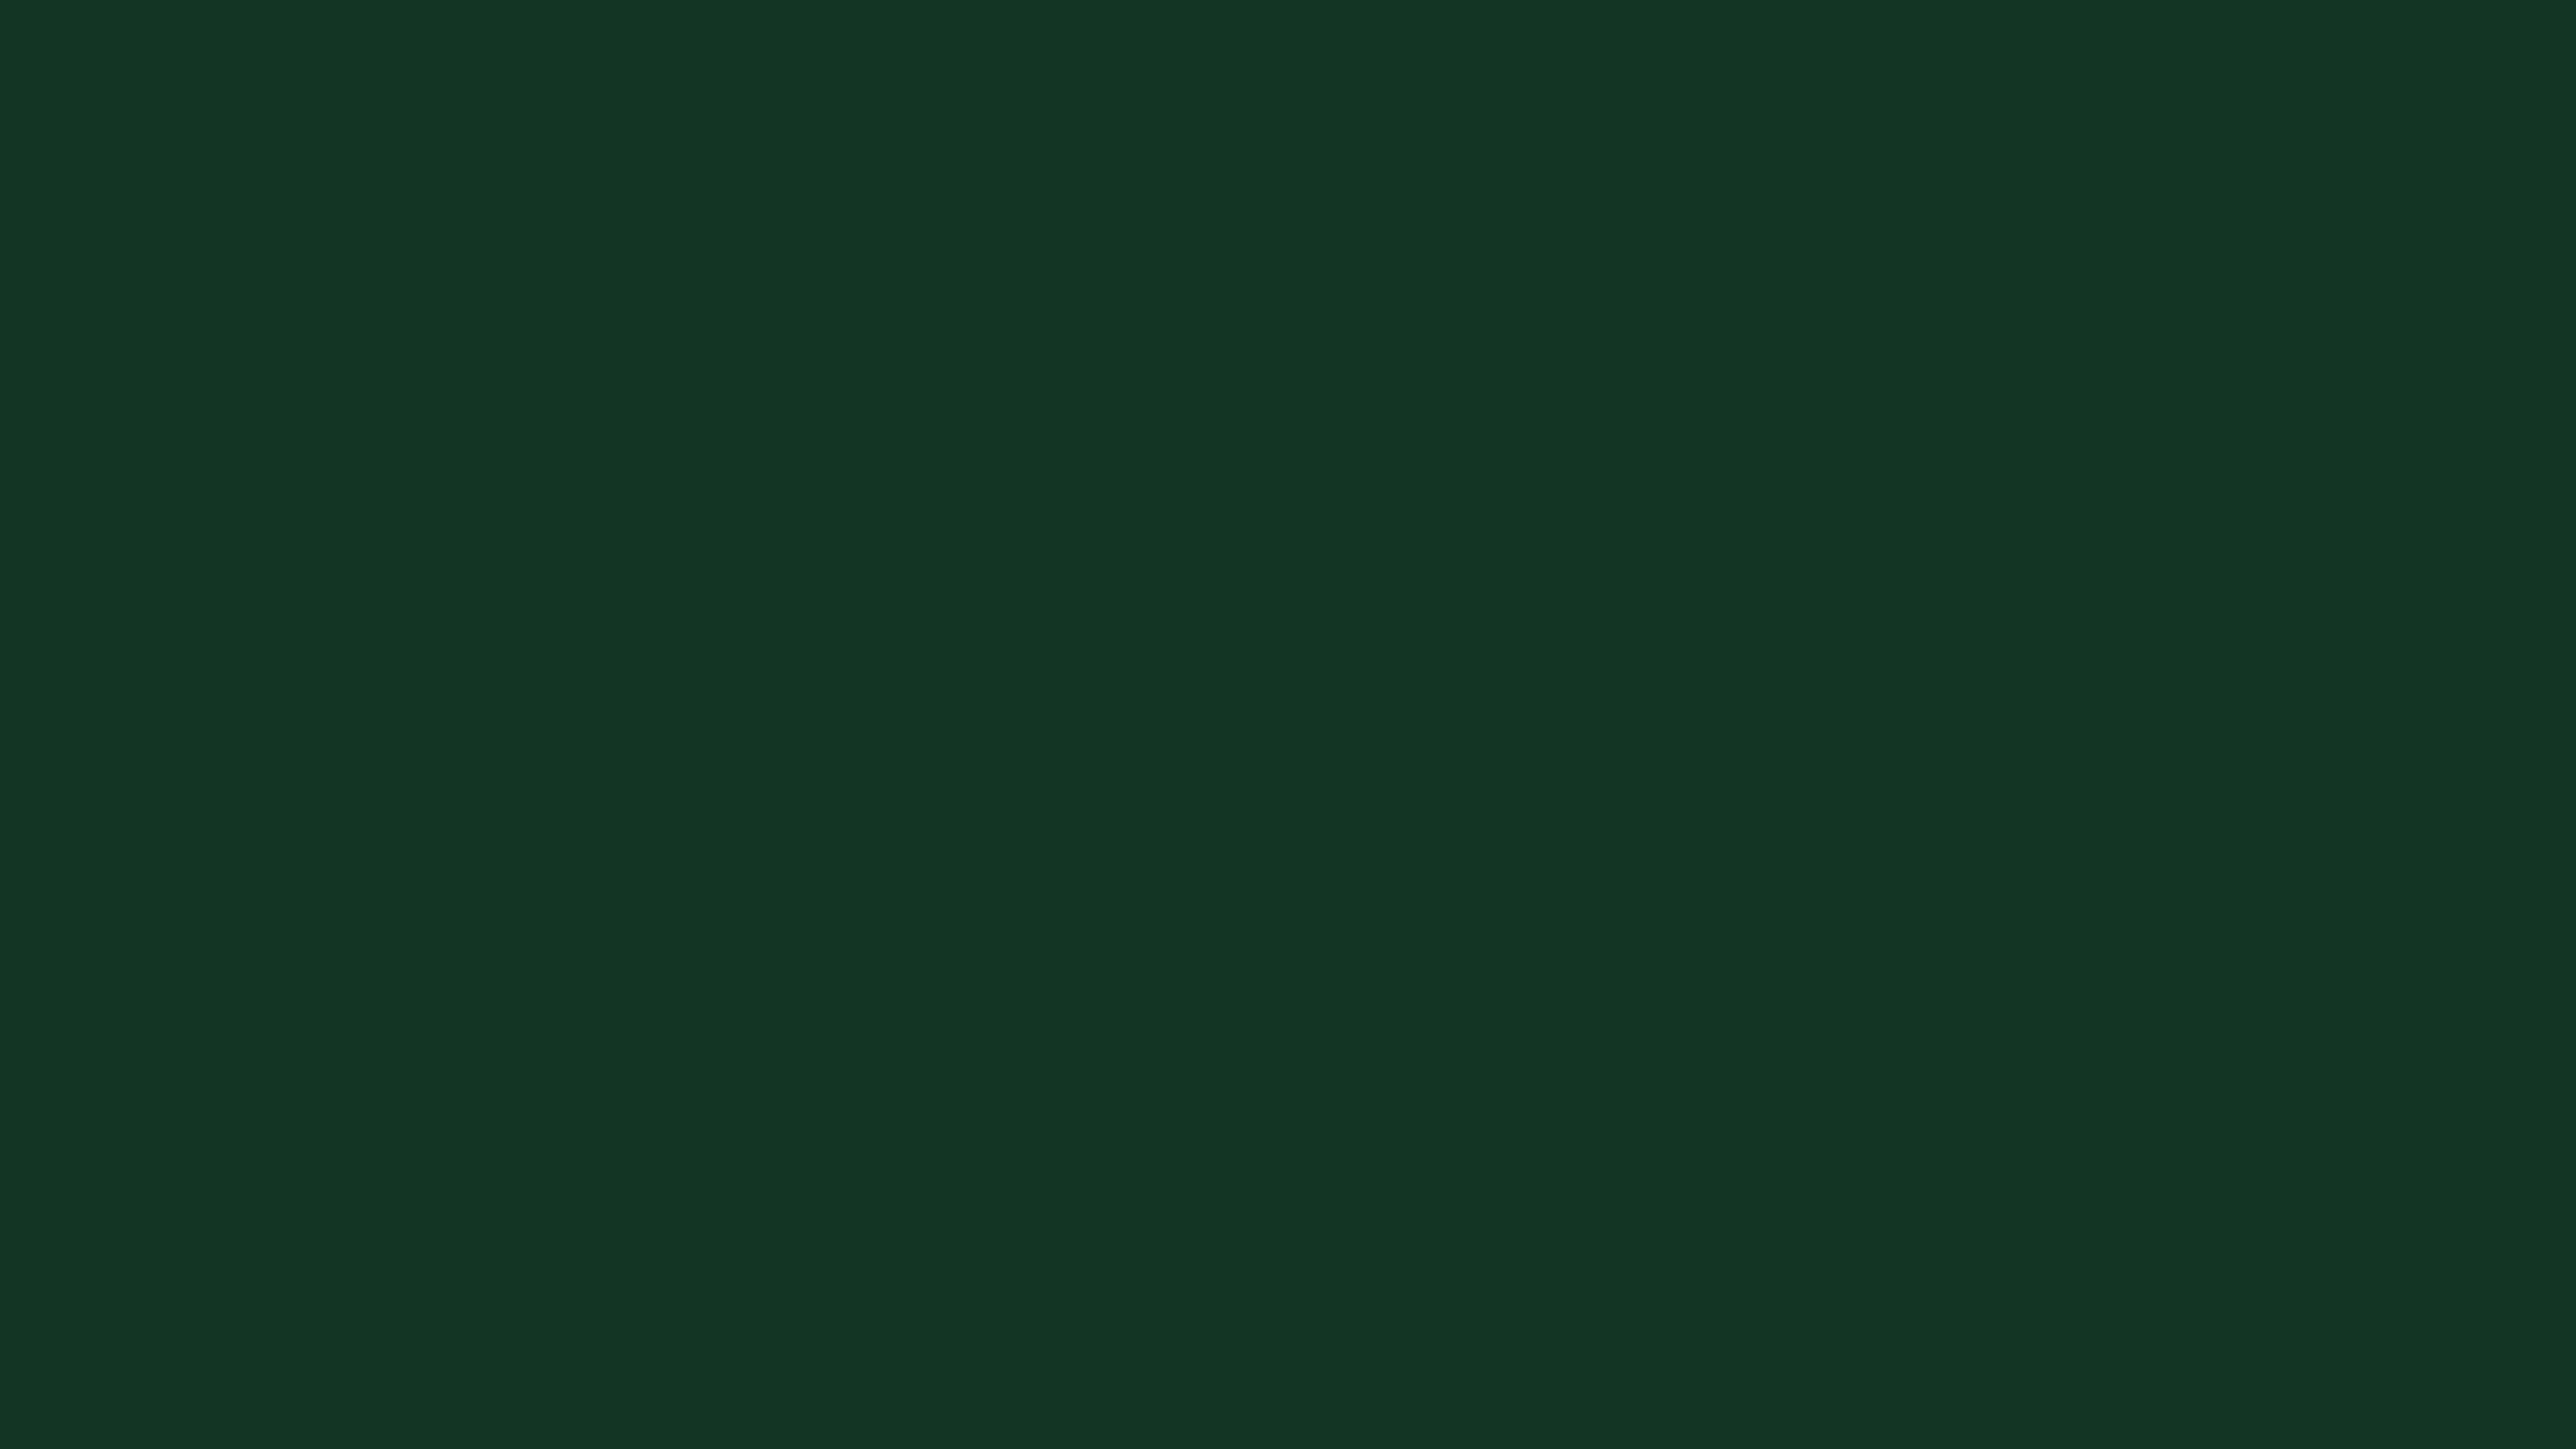 4096x2304 Phthalo Green Solid Color Background